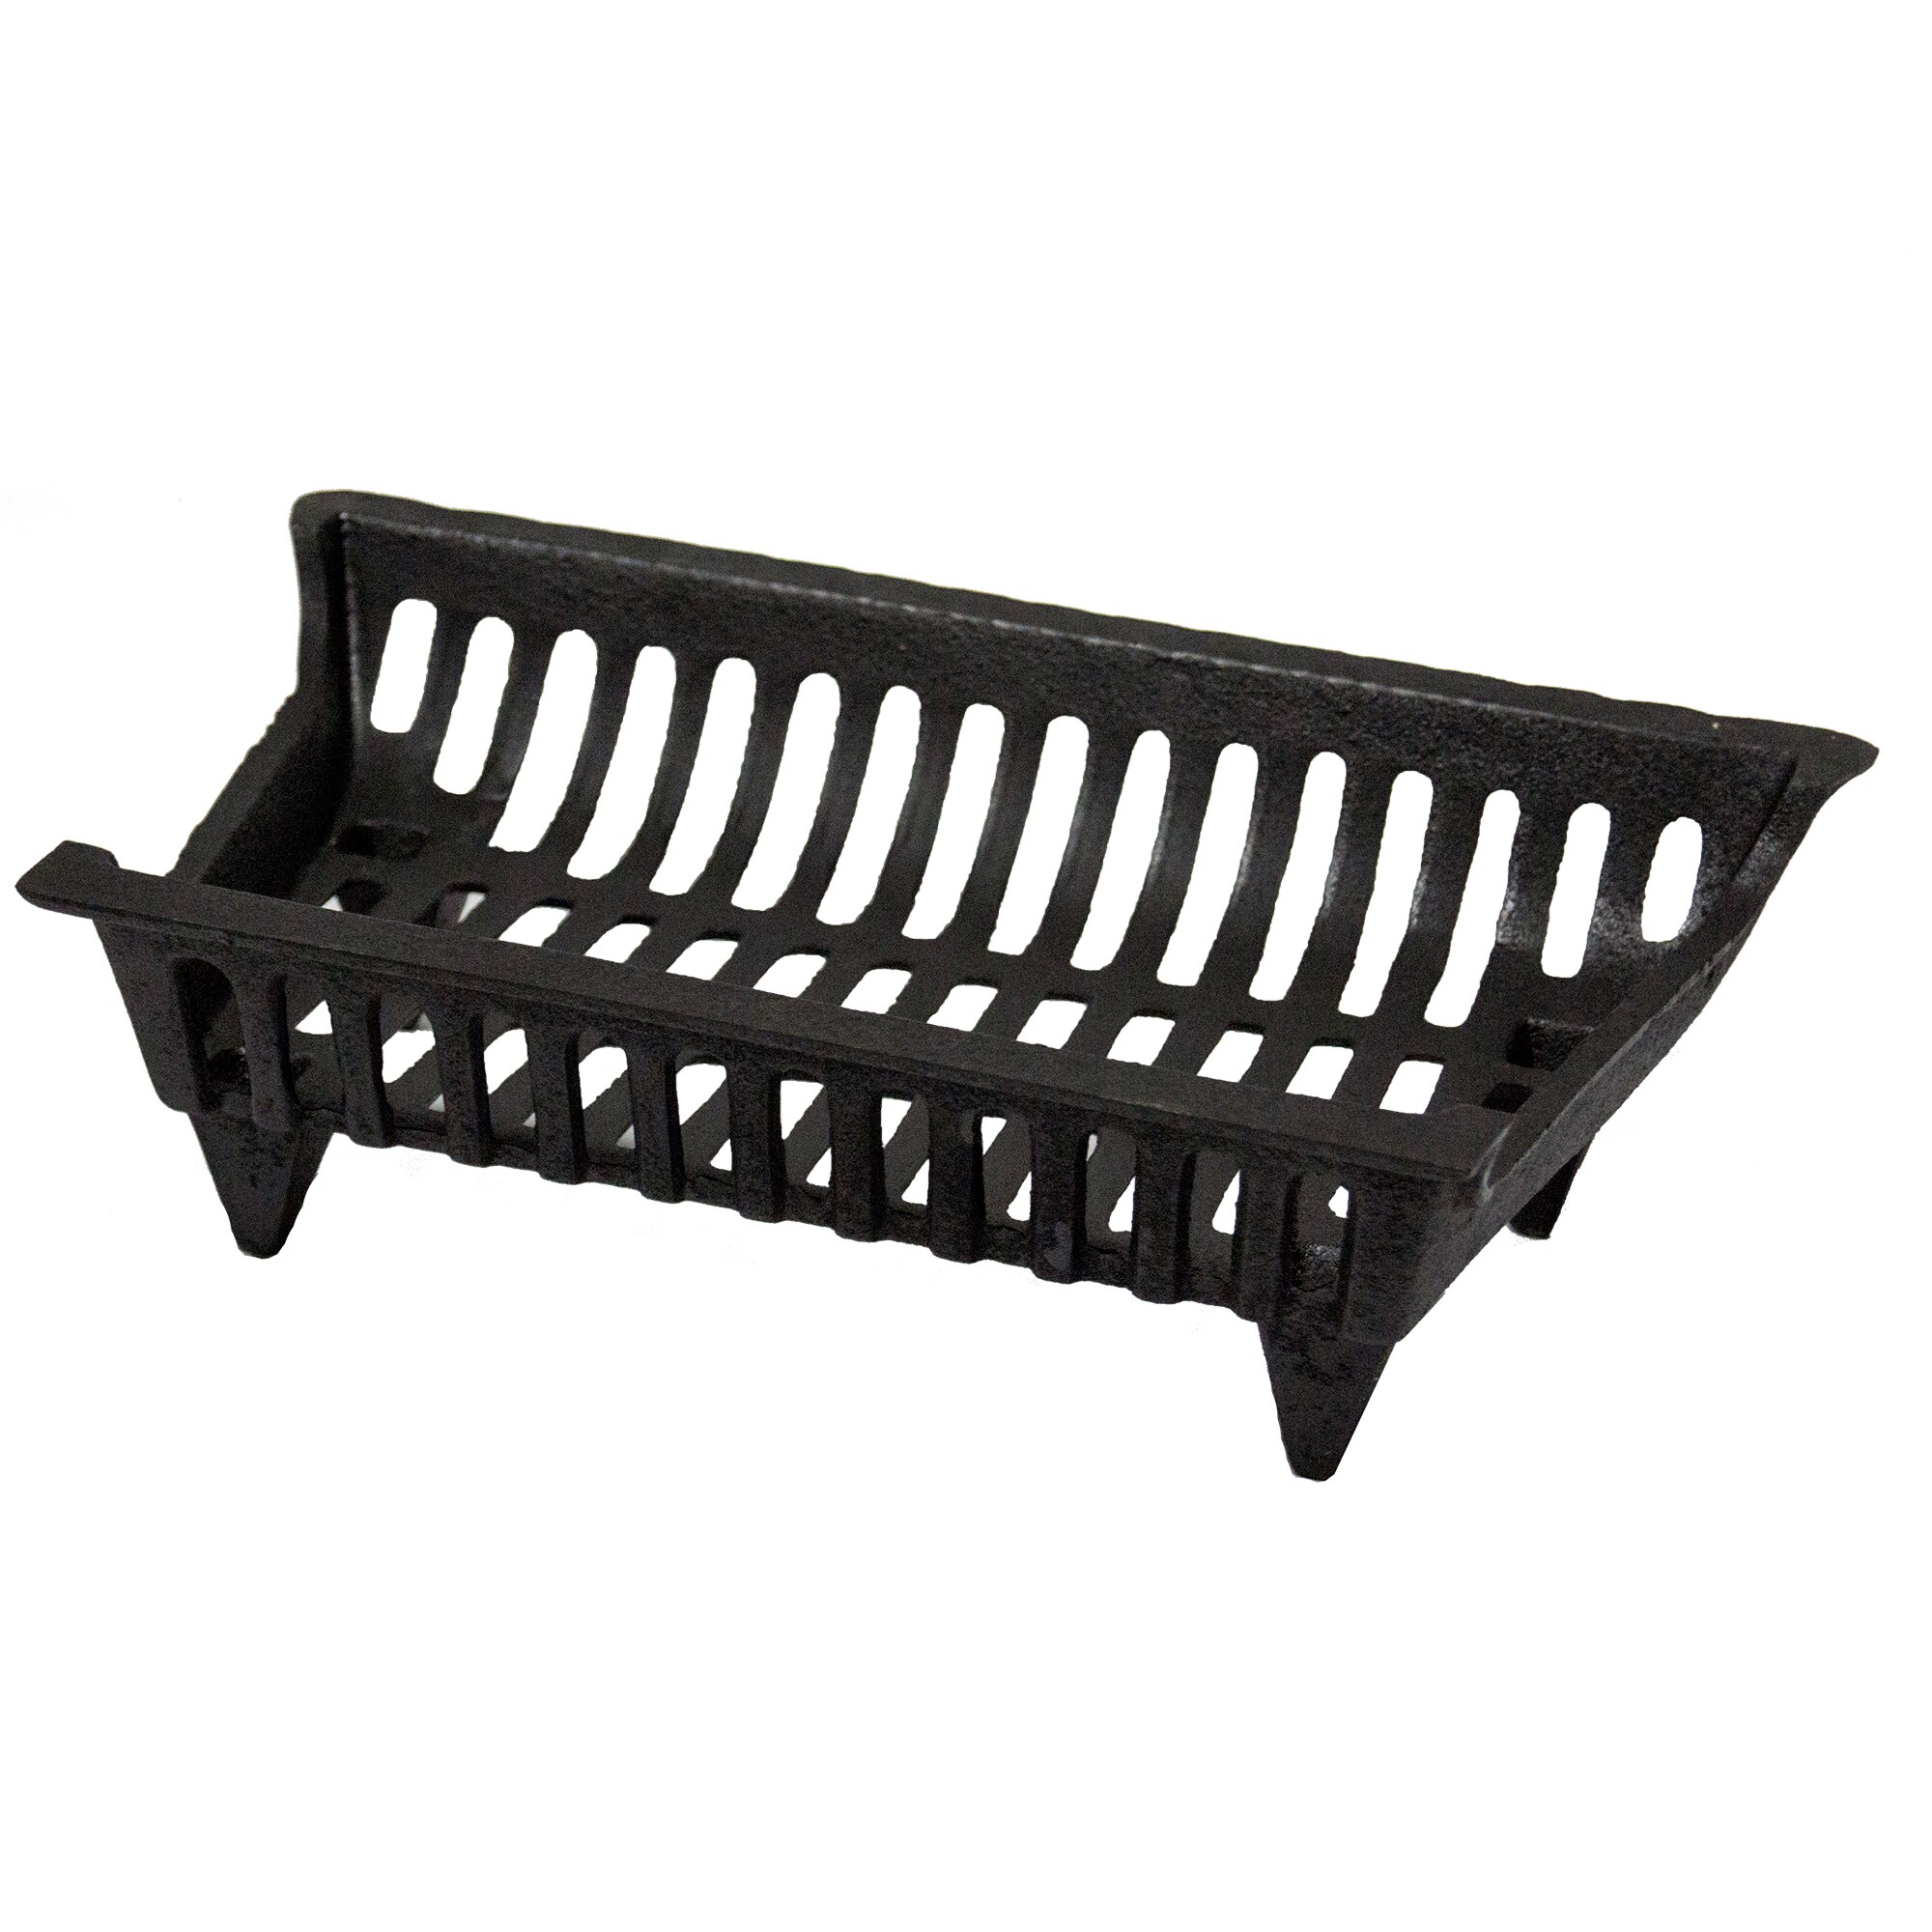 Fireplace Grate 3/4 in 21 in 5-Bar Solid Steel Modern Transitional Style 